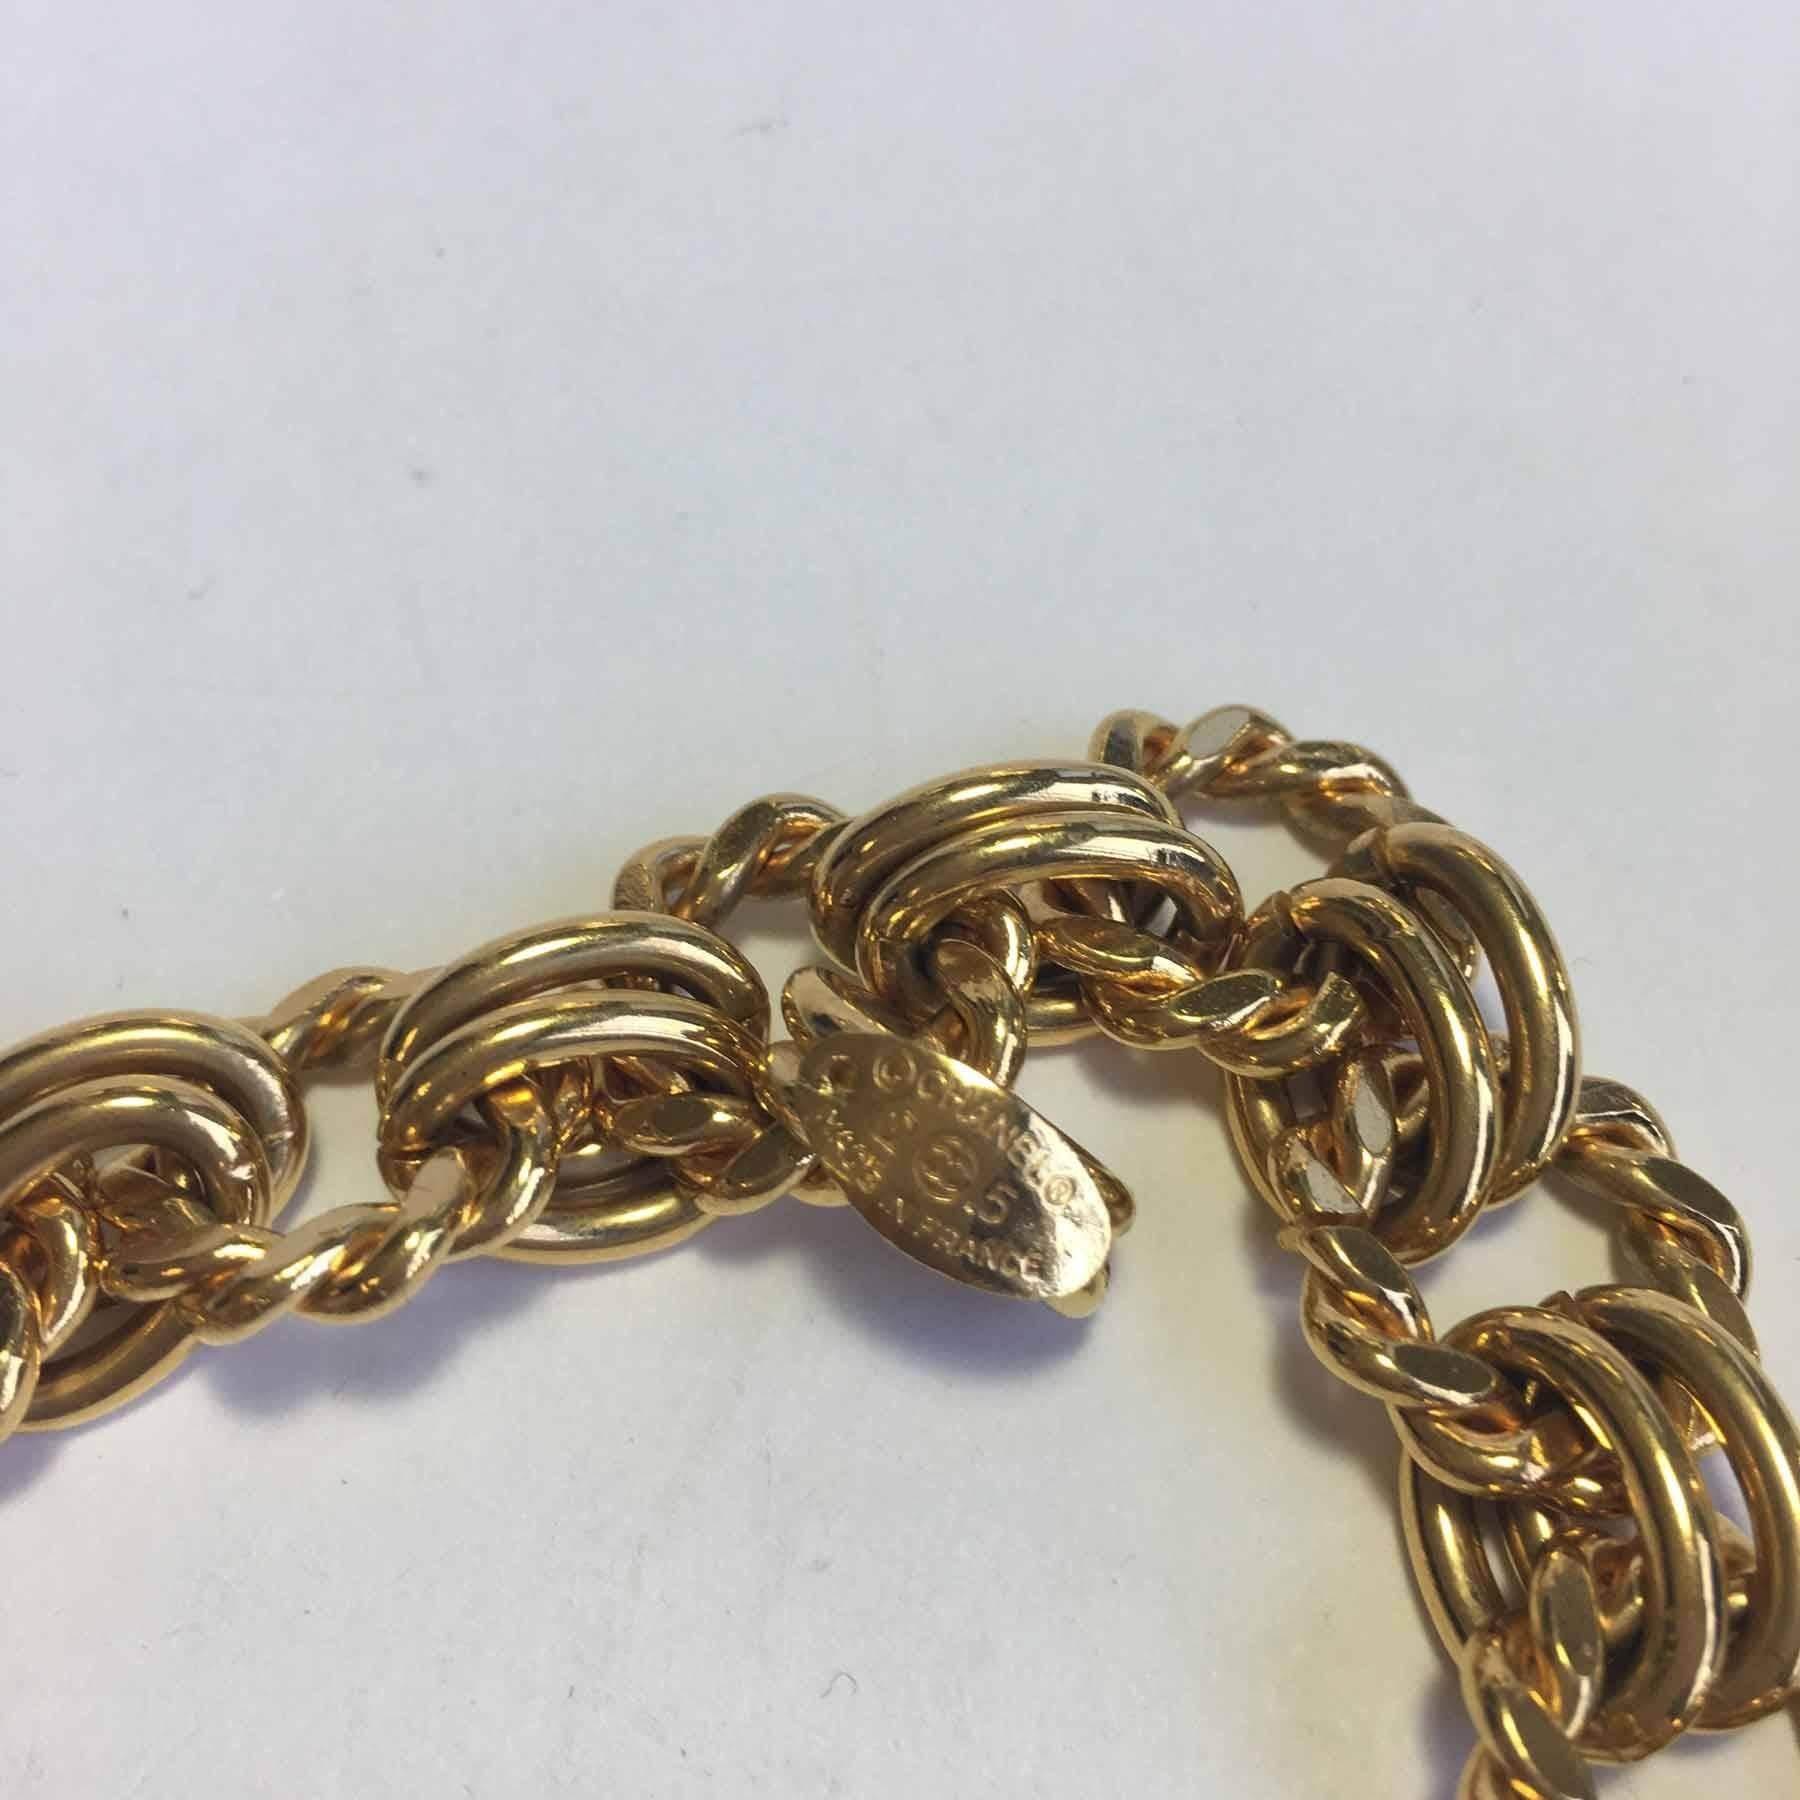 Vintage CHANEL Pendant Necklace in Gilded Metal 1